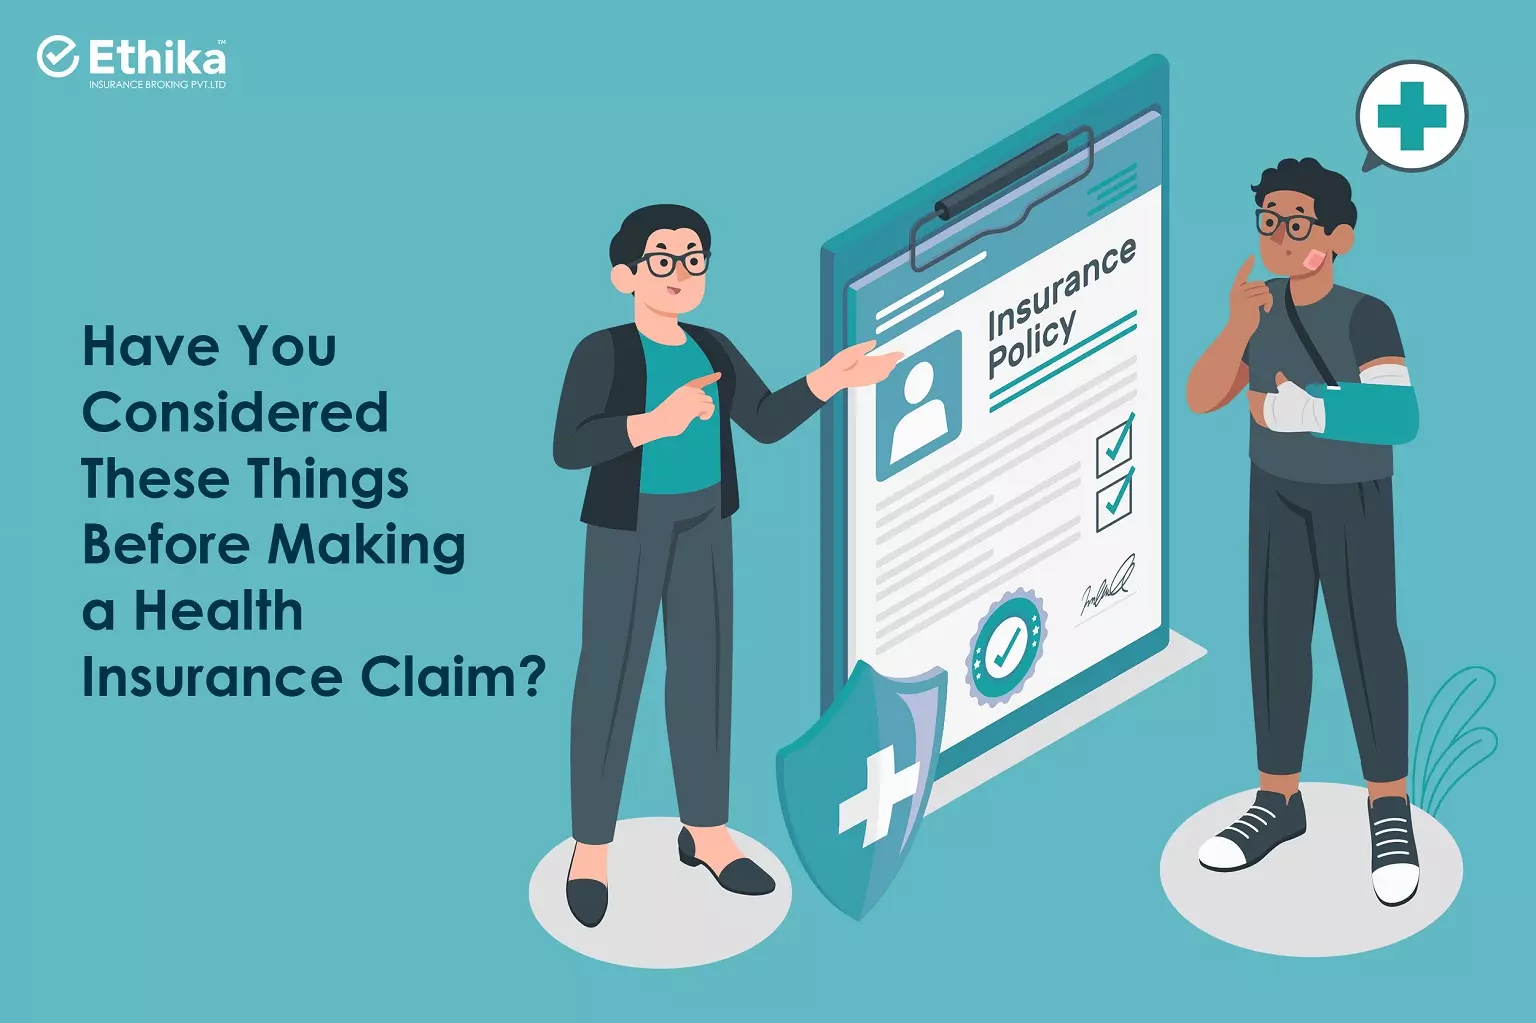 Considered These Things Before Making a Health Insurance Claim